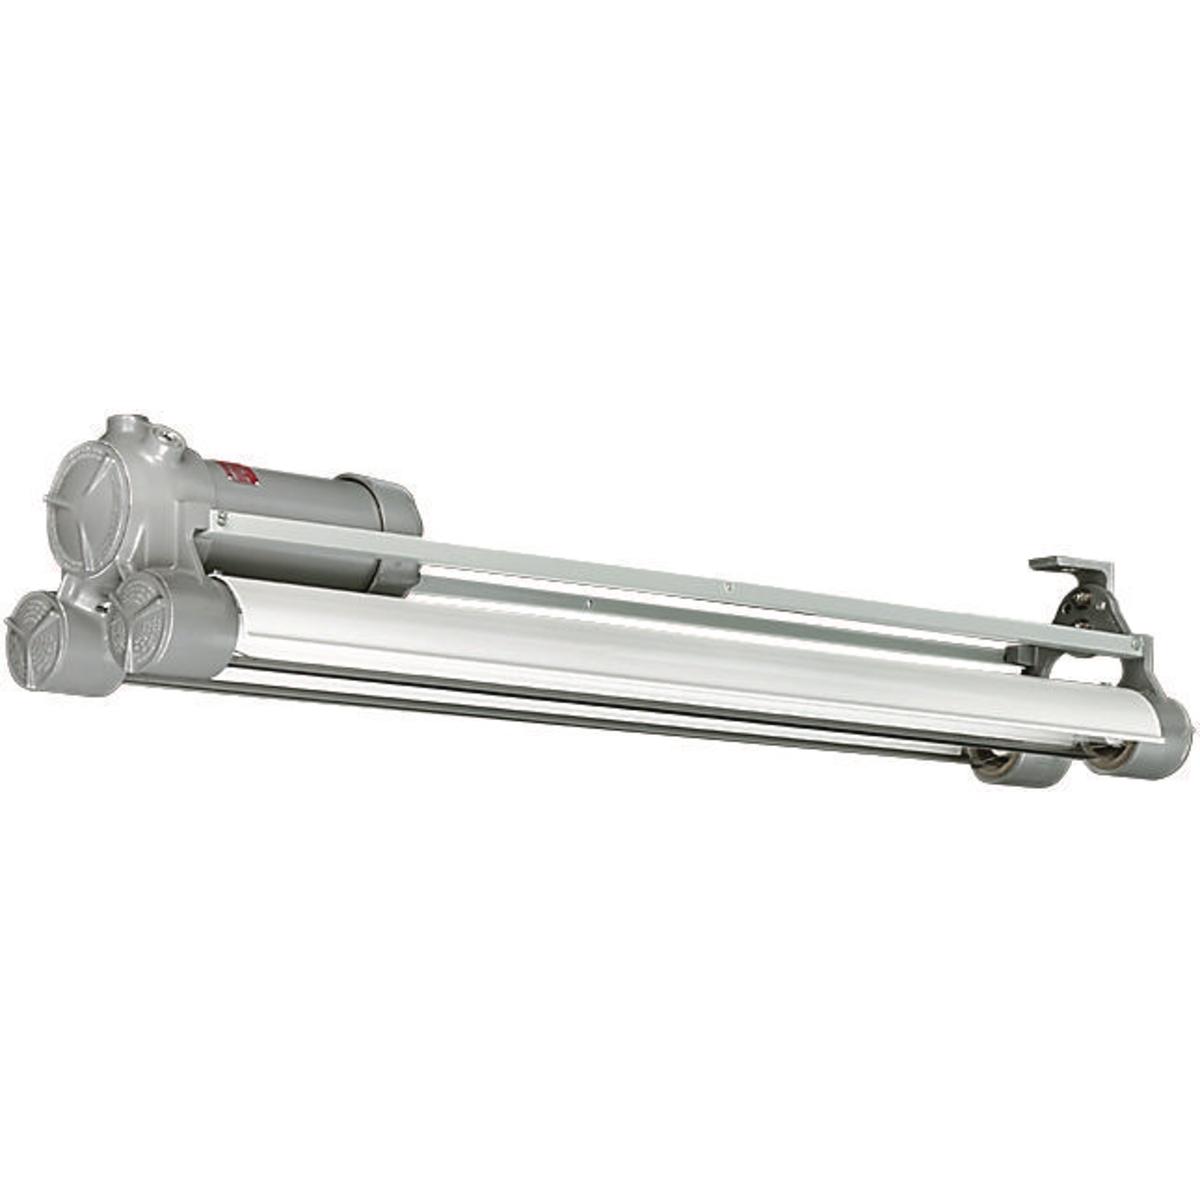 Hubbell HFX-460-302 HFX 54W 120-277V 50/60HZ 2 Lamp  ; UL Listed and labeled for use inside paint spray booths and rooms ; 2’ nominal compact models facilitate use in areas too small for nominal 4’ models, or where the light must be confined ; Standard ballast is 120-277V at